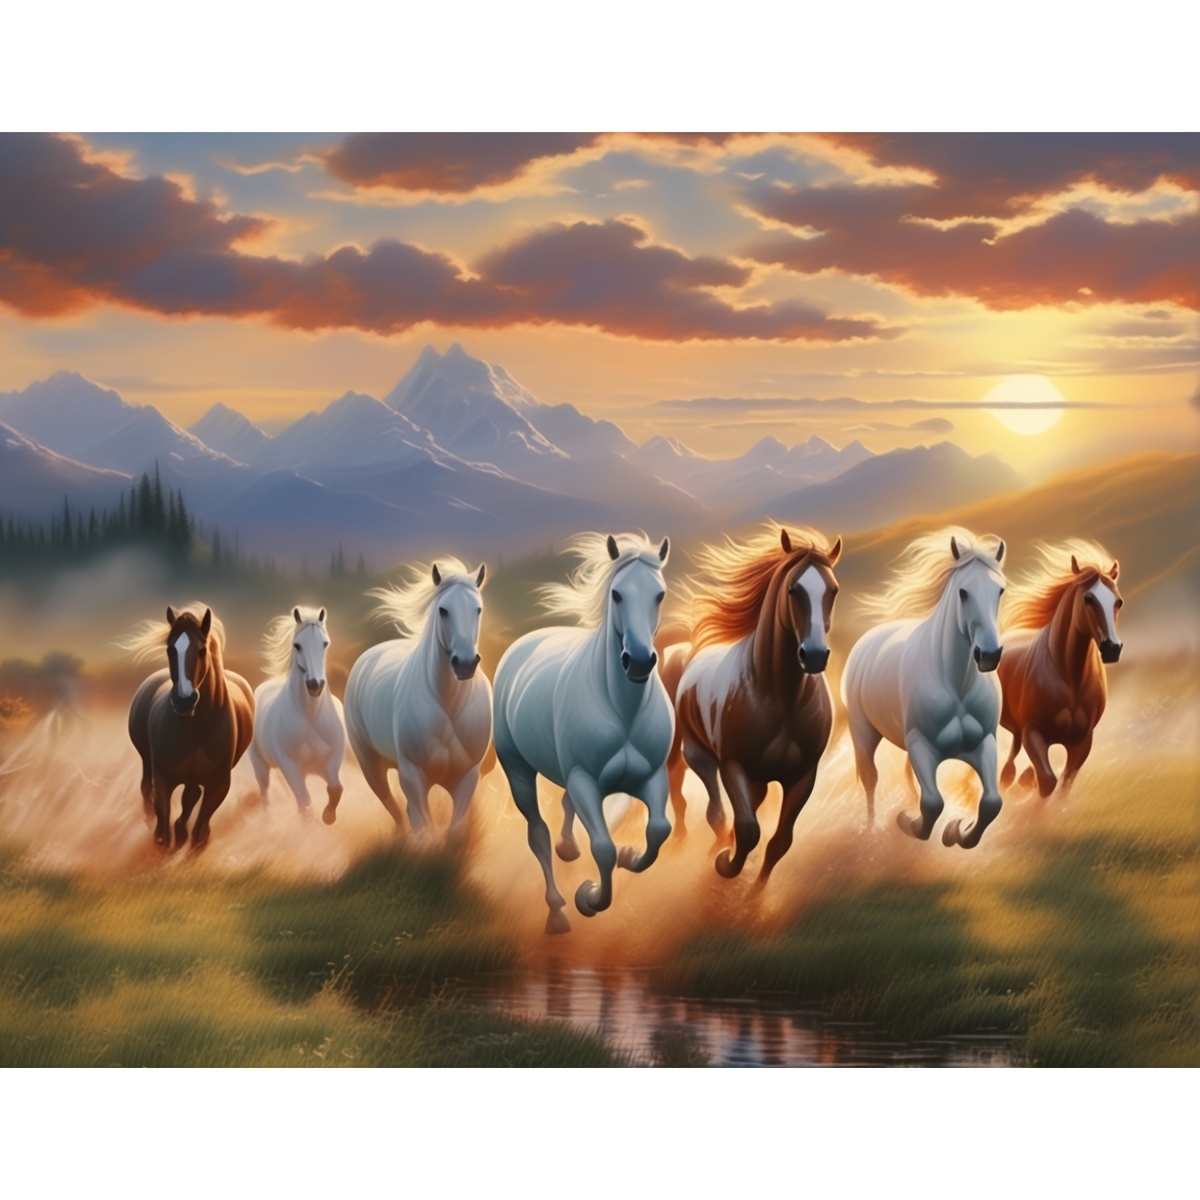 

1pc Horse Diamond Art Painting Tools Adult Diy Diamond Art Tools For Beginners With Round Full Artificial Diamond Gems Gifts For Home Wall Decor